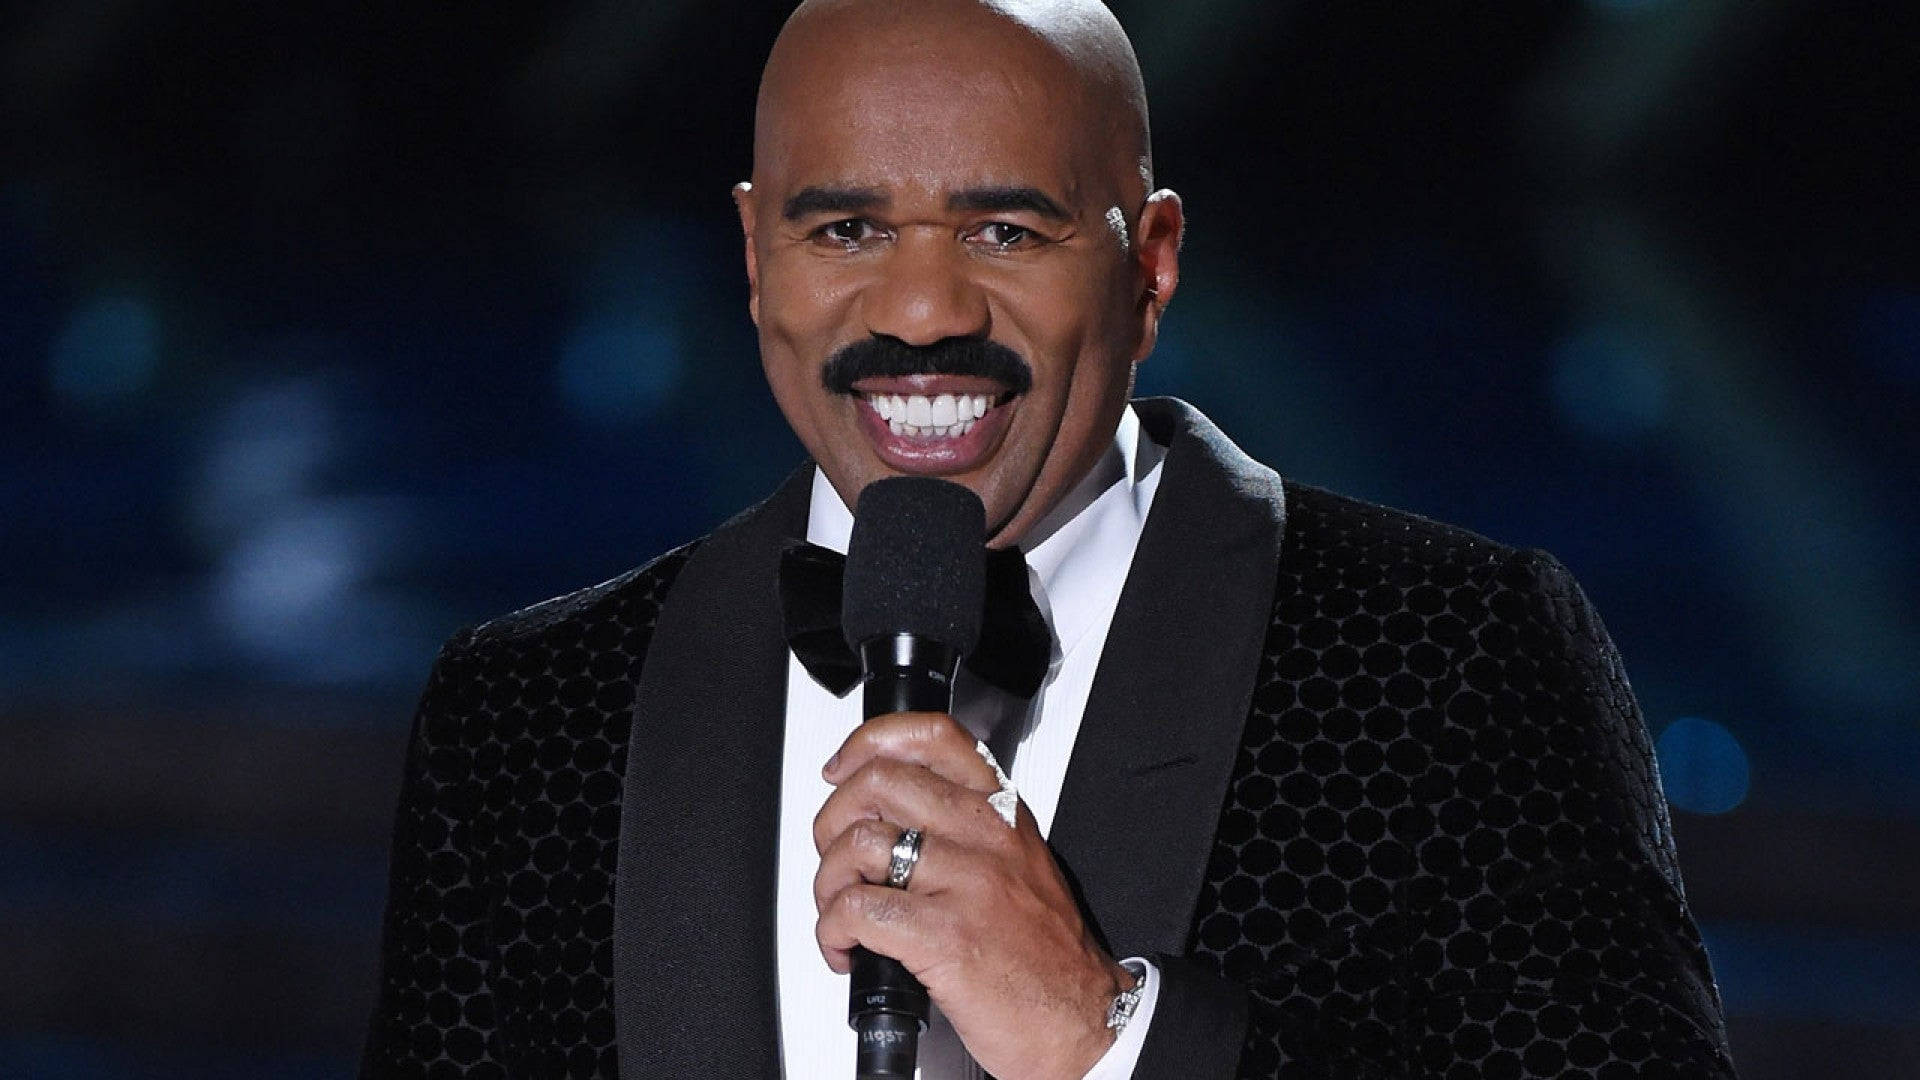 Steve Harvey Laughing With Microphone Background